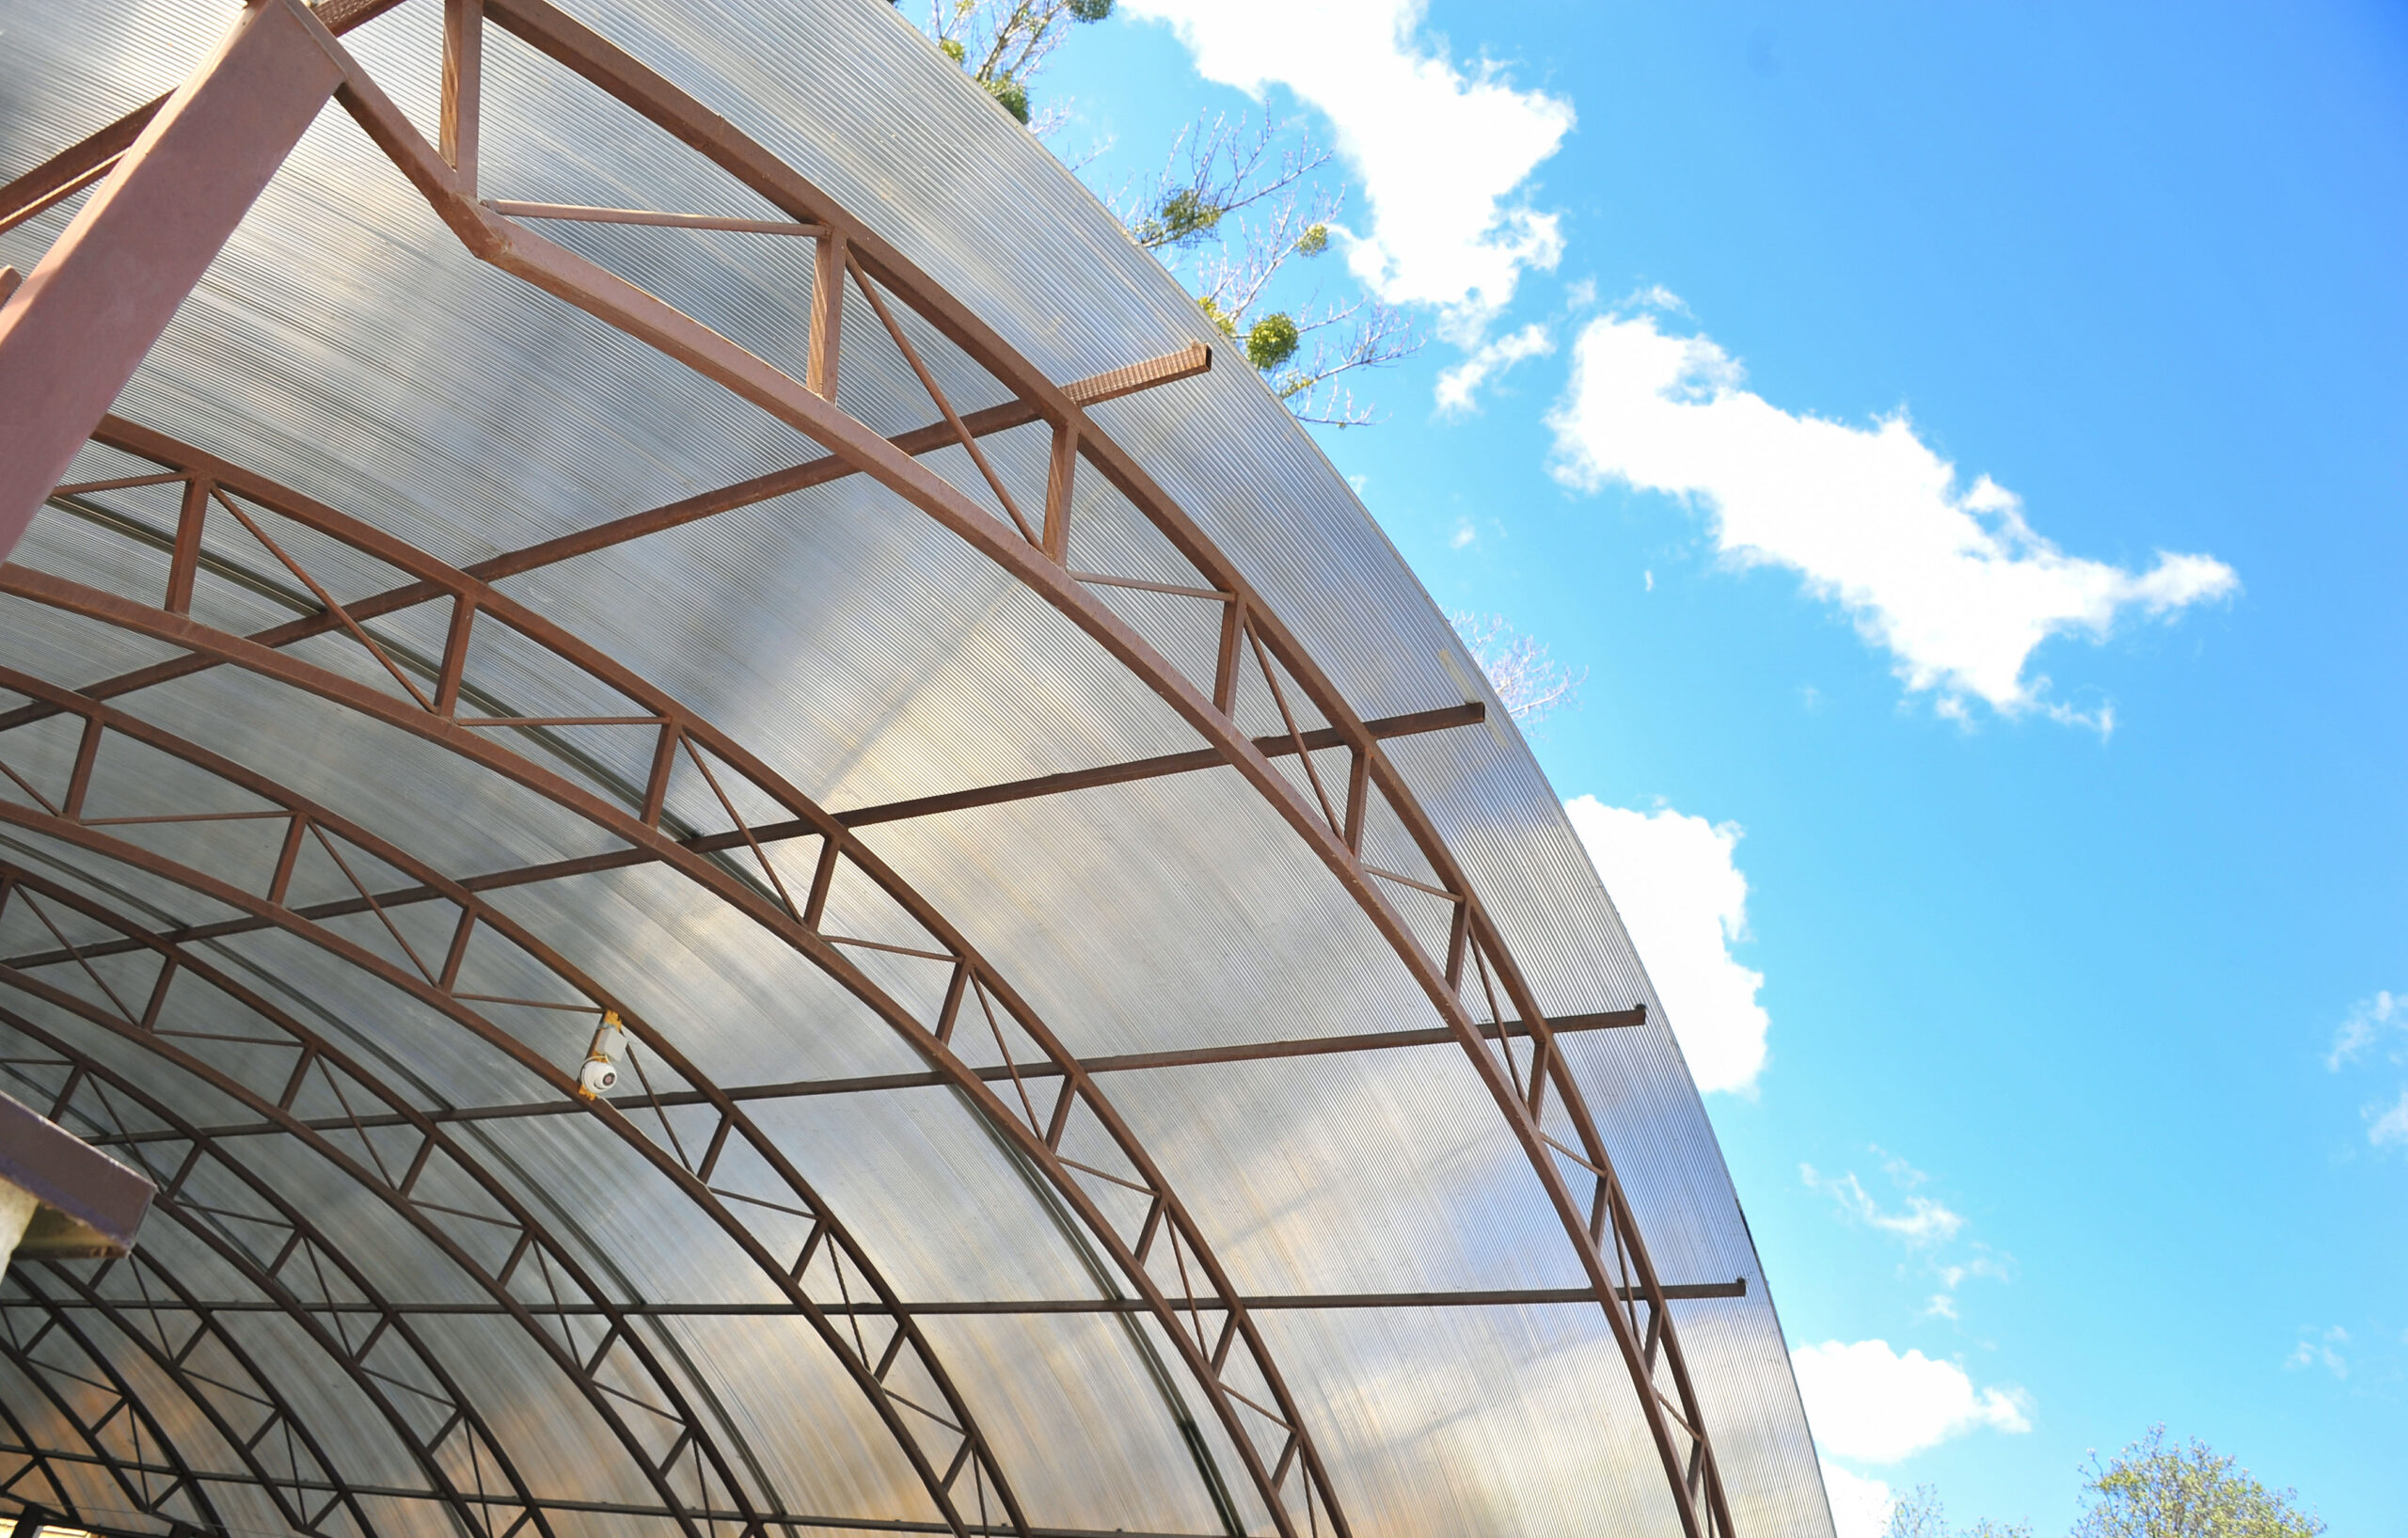 Canopy from polycarbonate arc. Metalware